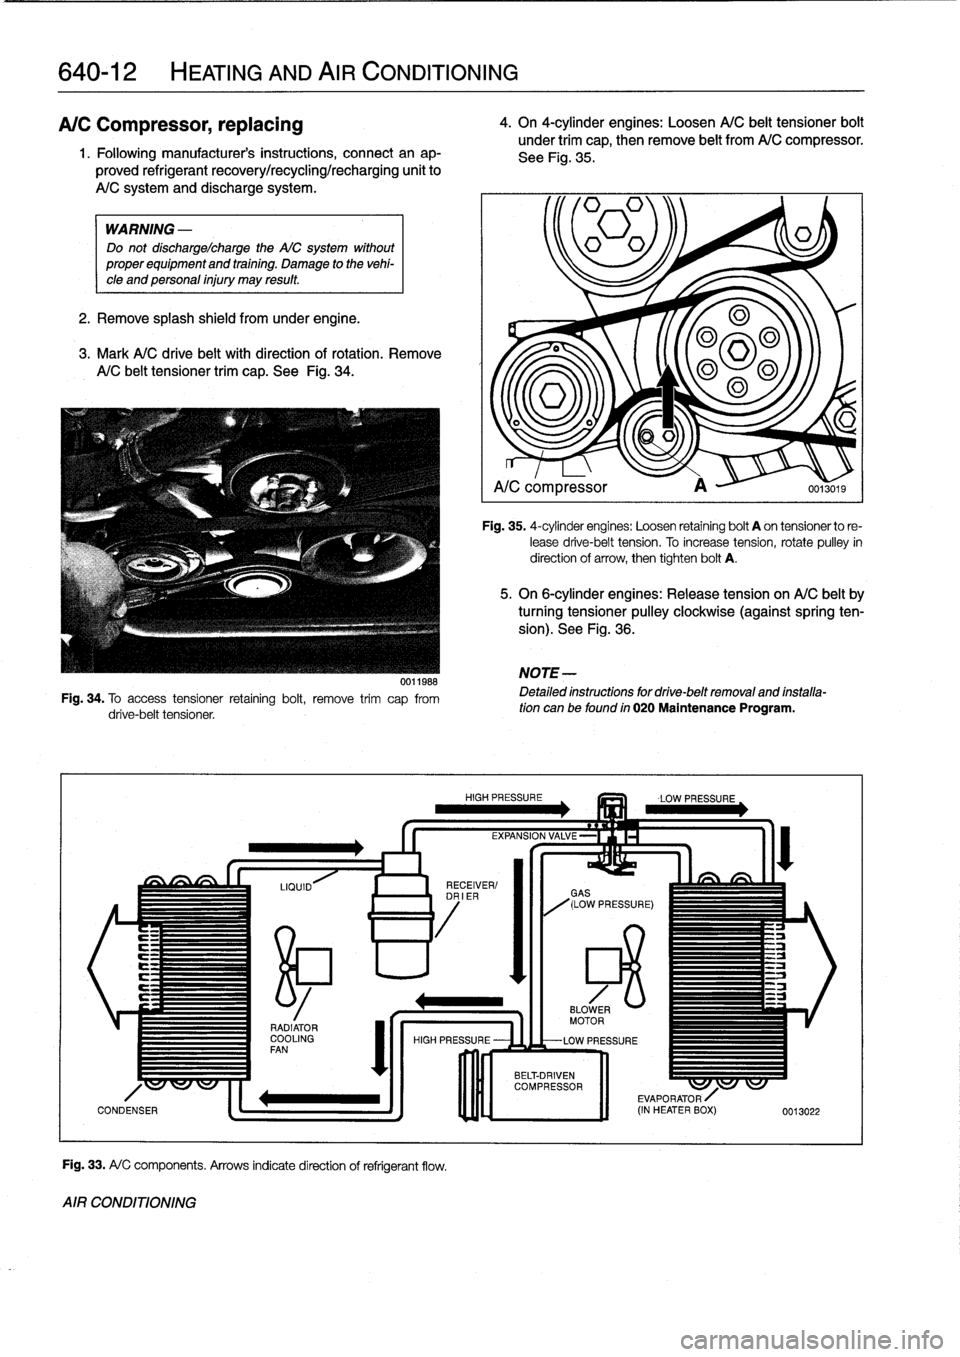 BMW 328i 1998 E36 Owners Manual 
640-12

	

HEATING
AND
AIR
CONDITIONING

A/C
Compressor,
replacing

1
.
Followingmanufacturers
instructions,
connectanap-

proved
refrigerant
recovery/recycling/recharging
unit
to

A/C
system
and
di